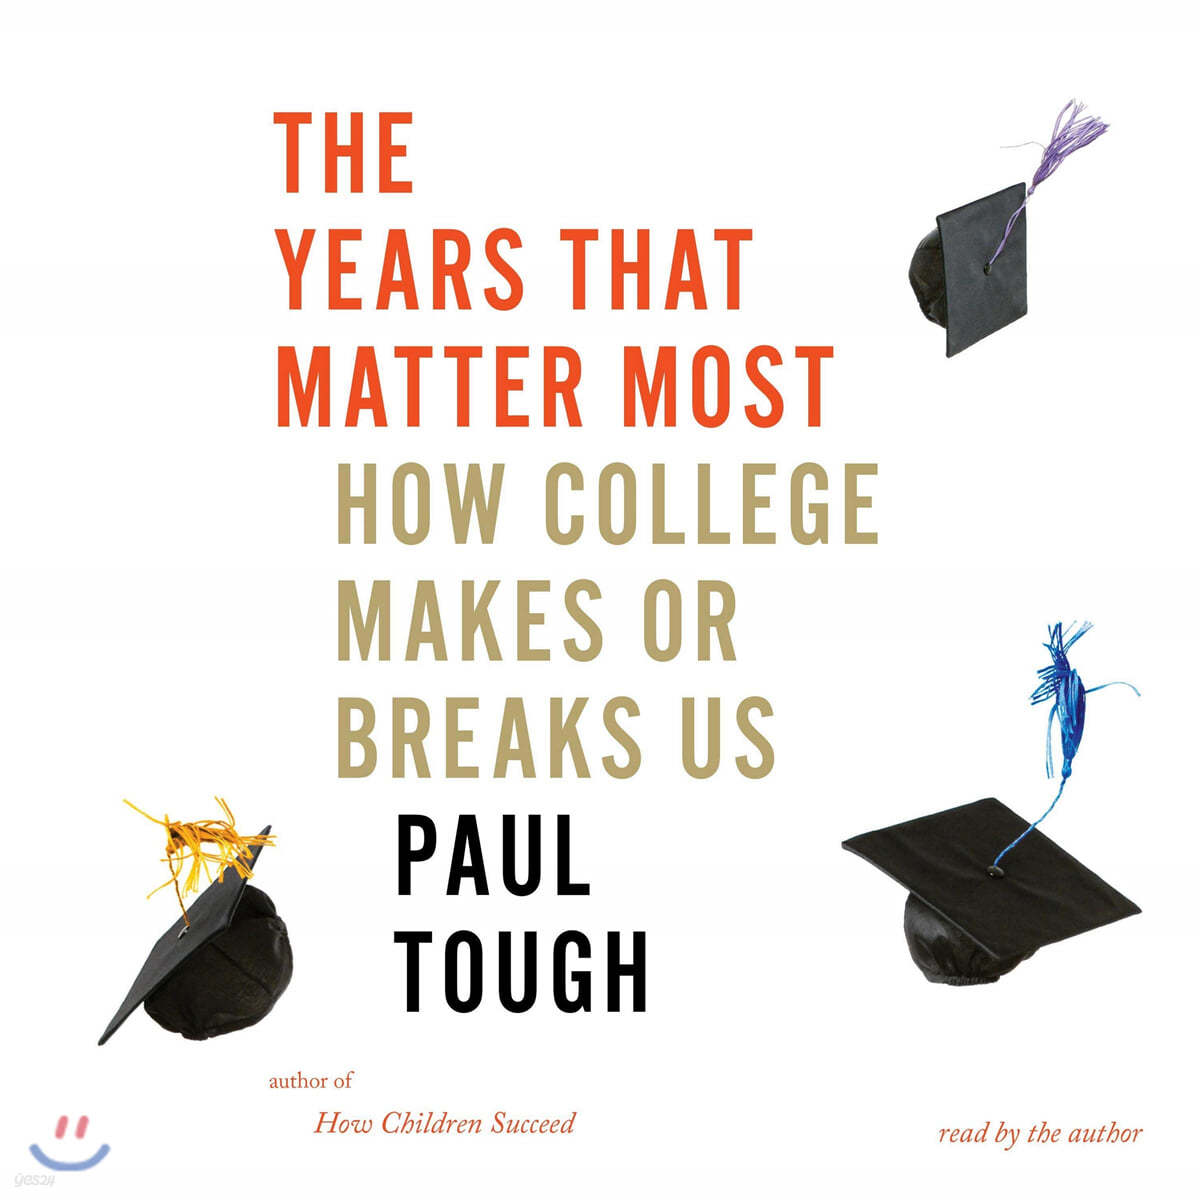 The Years That Matter Most: How College Makes or Breaks Us